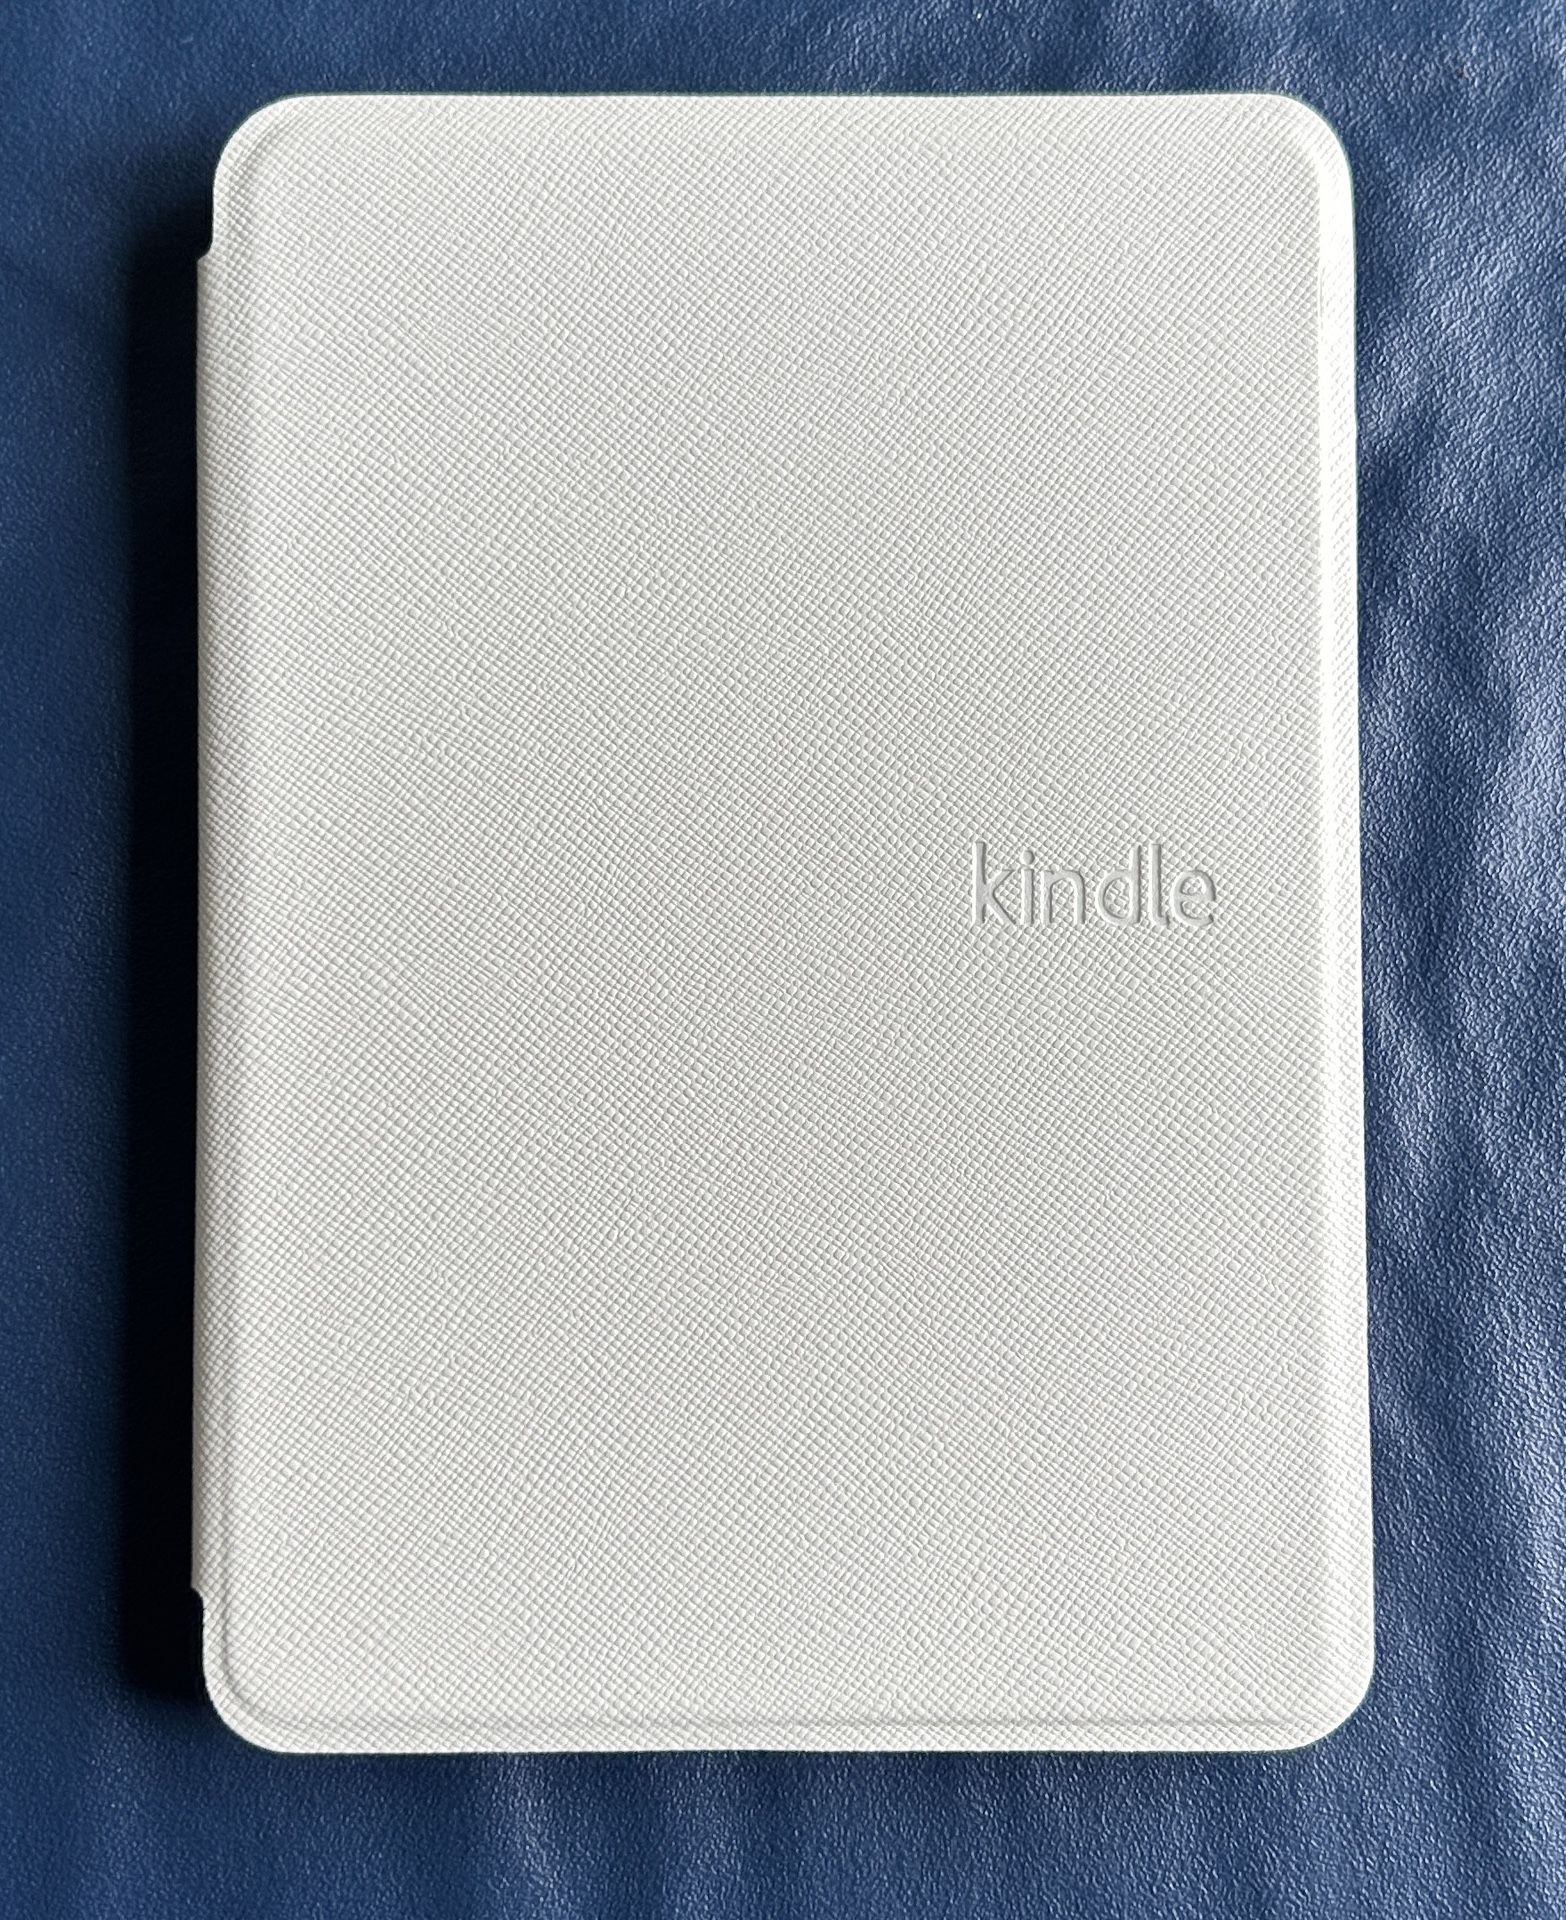 Case For Kindle 6inch